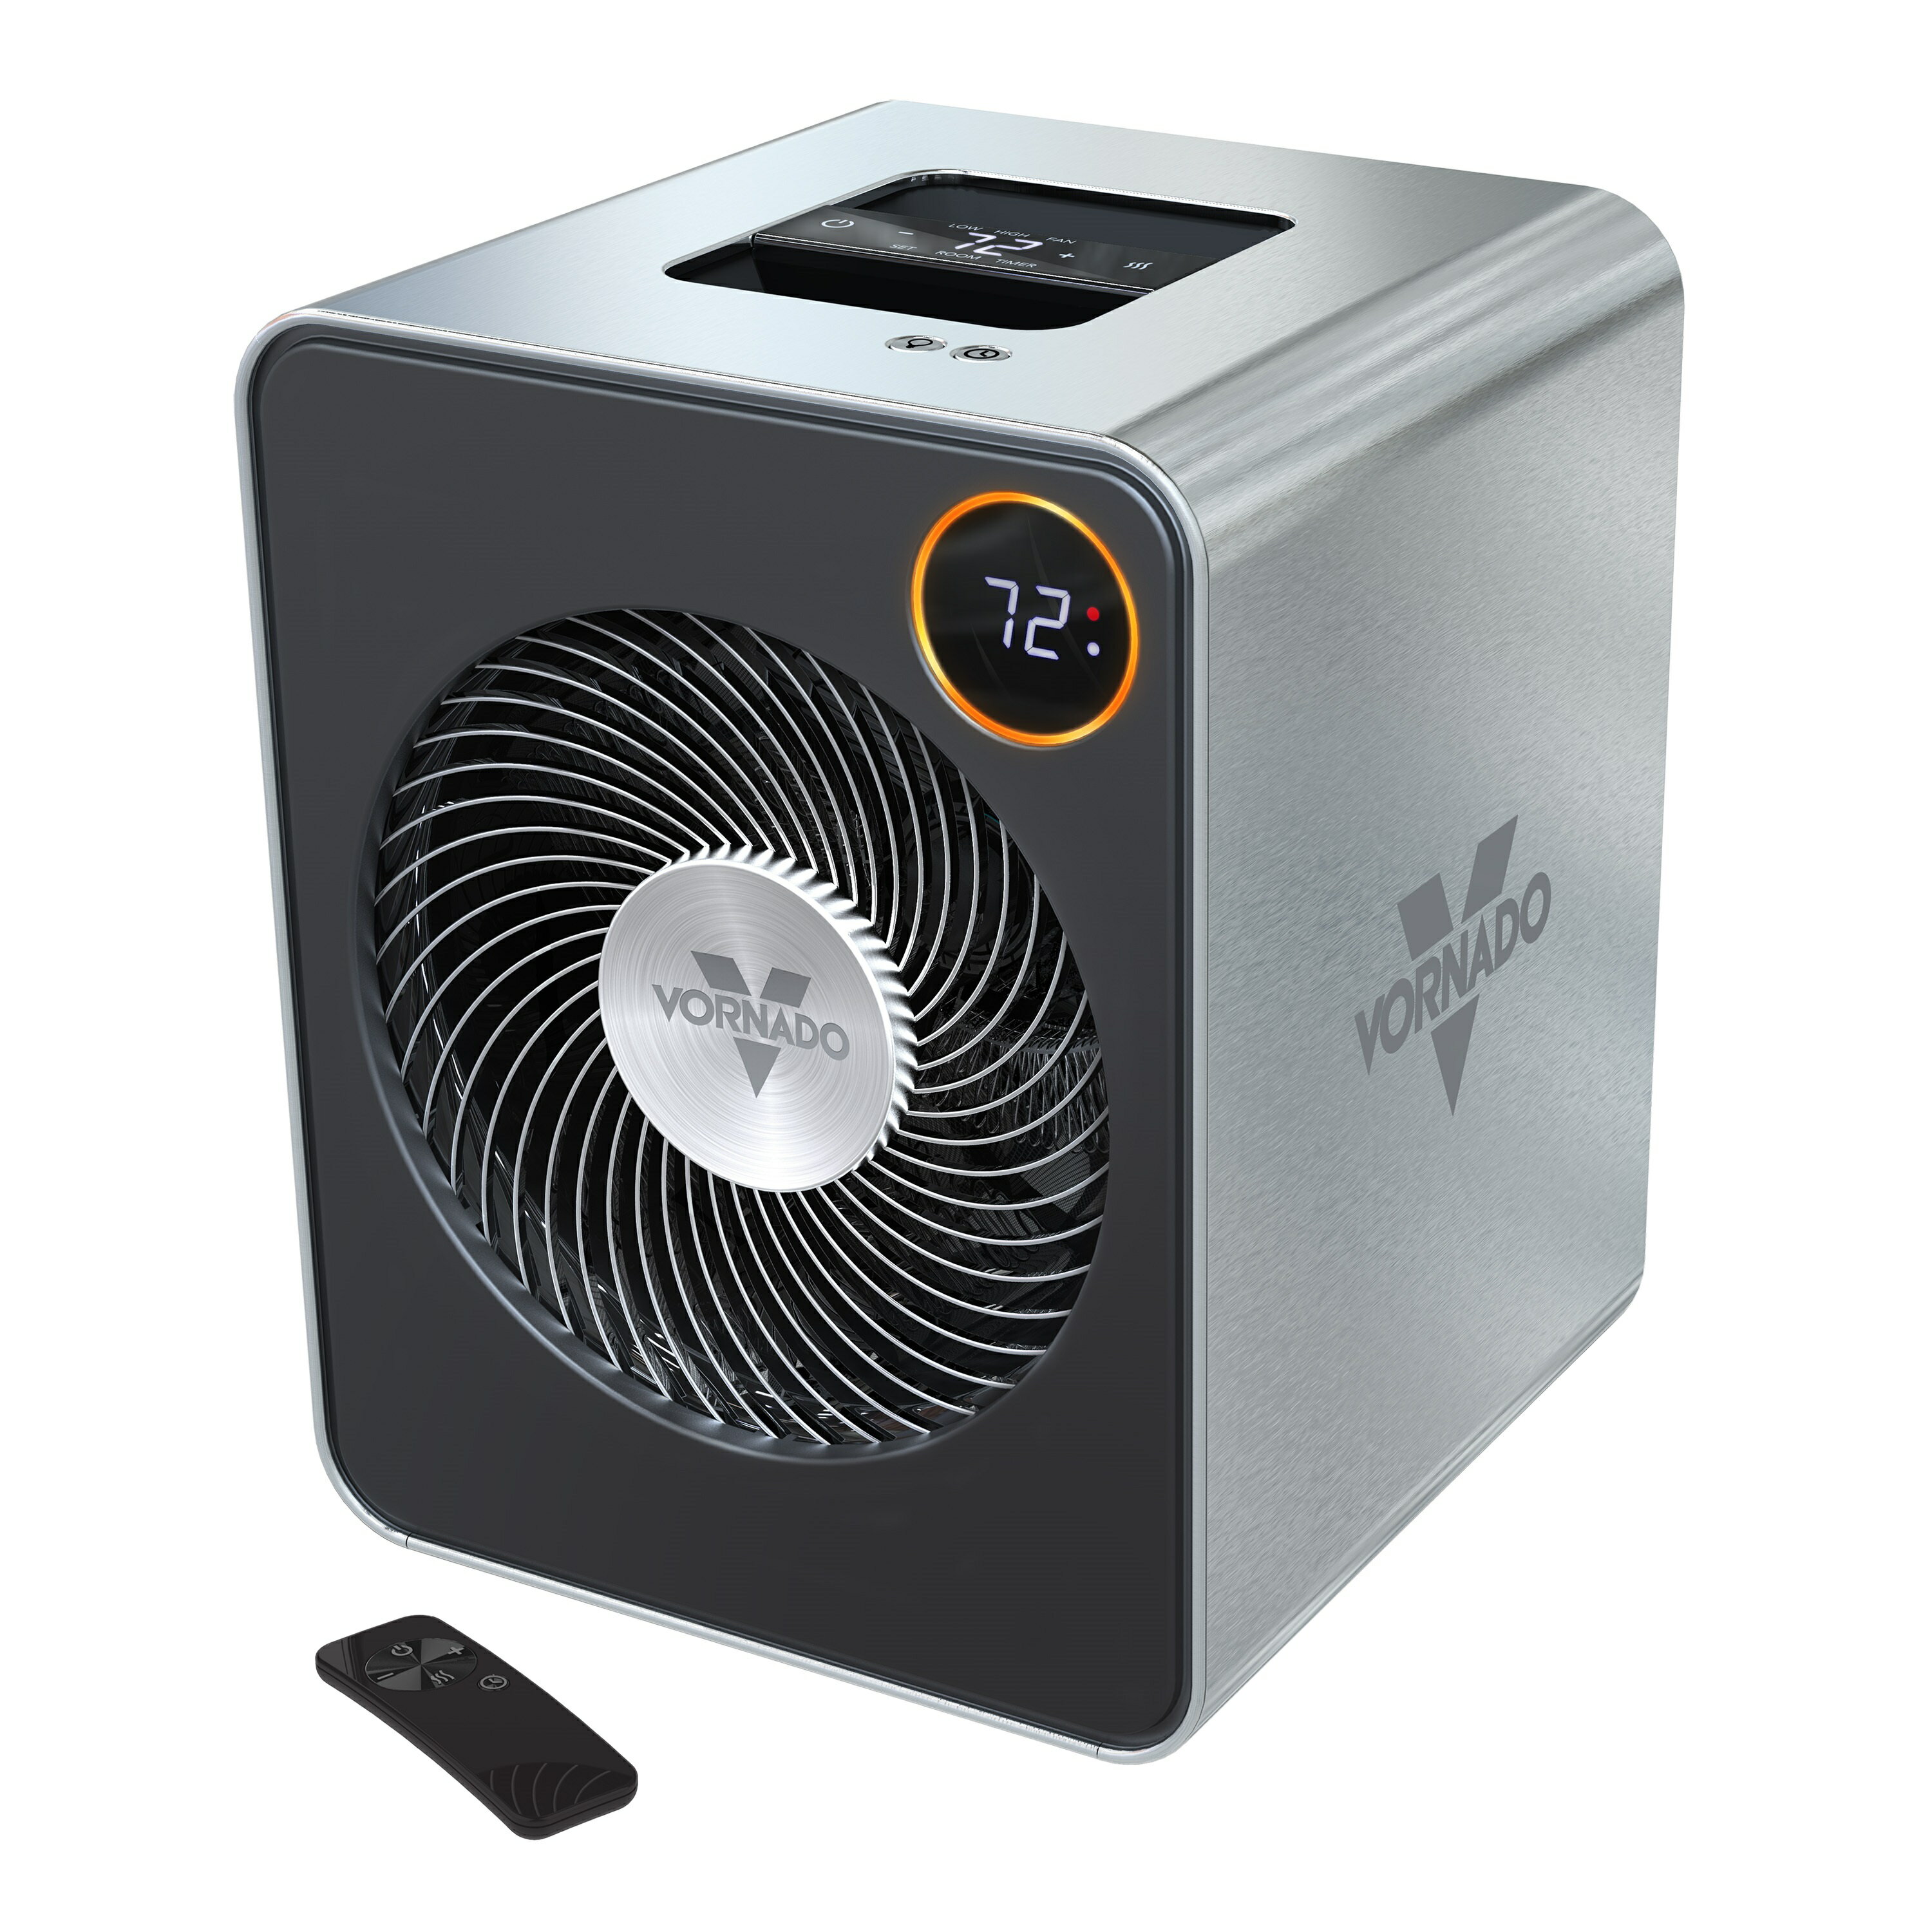 Vmh600 Automatic Stainless Steel Whole Room Heater